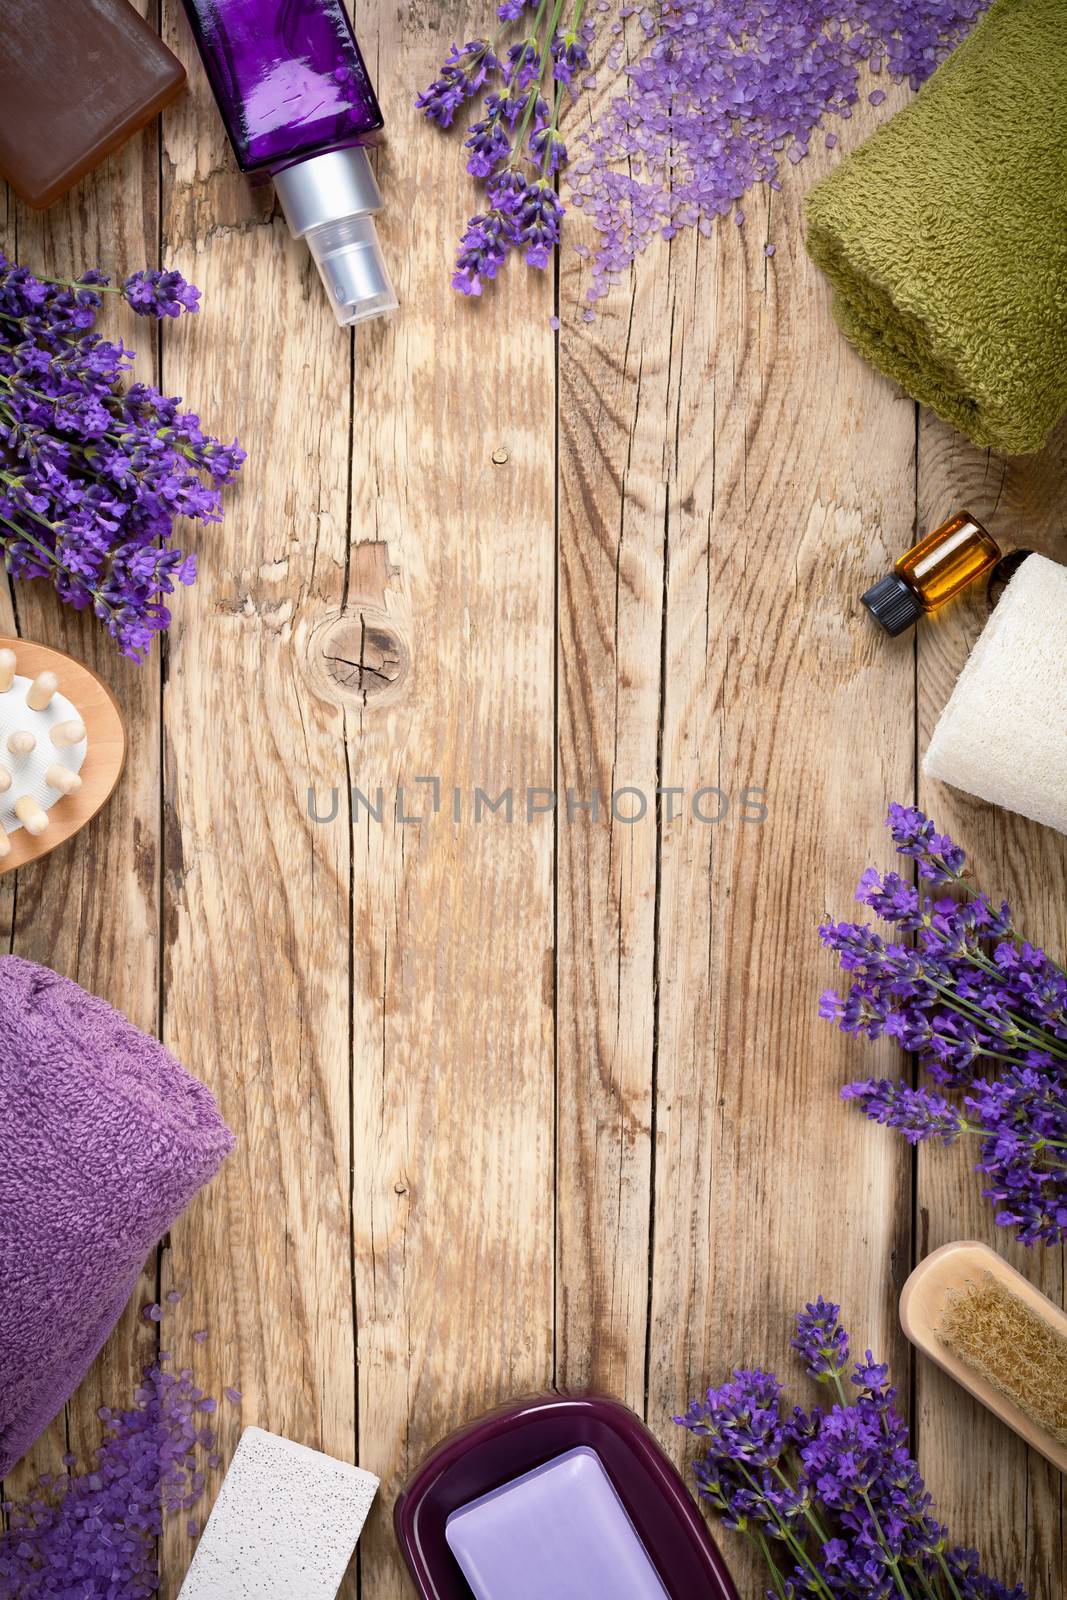 Lavender wellness products on wooden table. Copy space. Top view